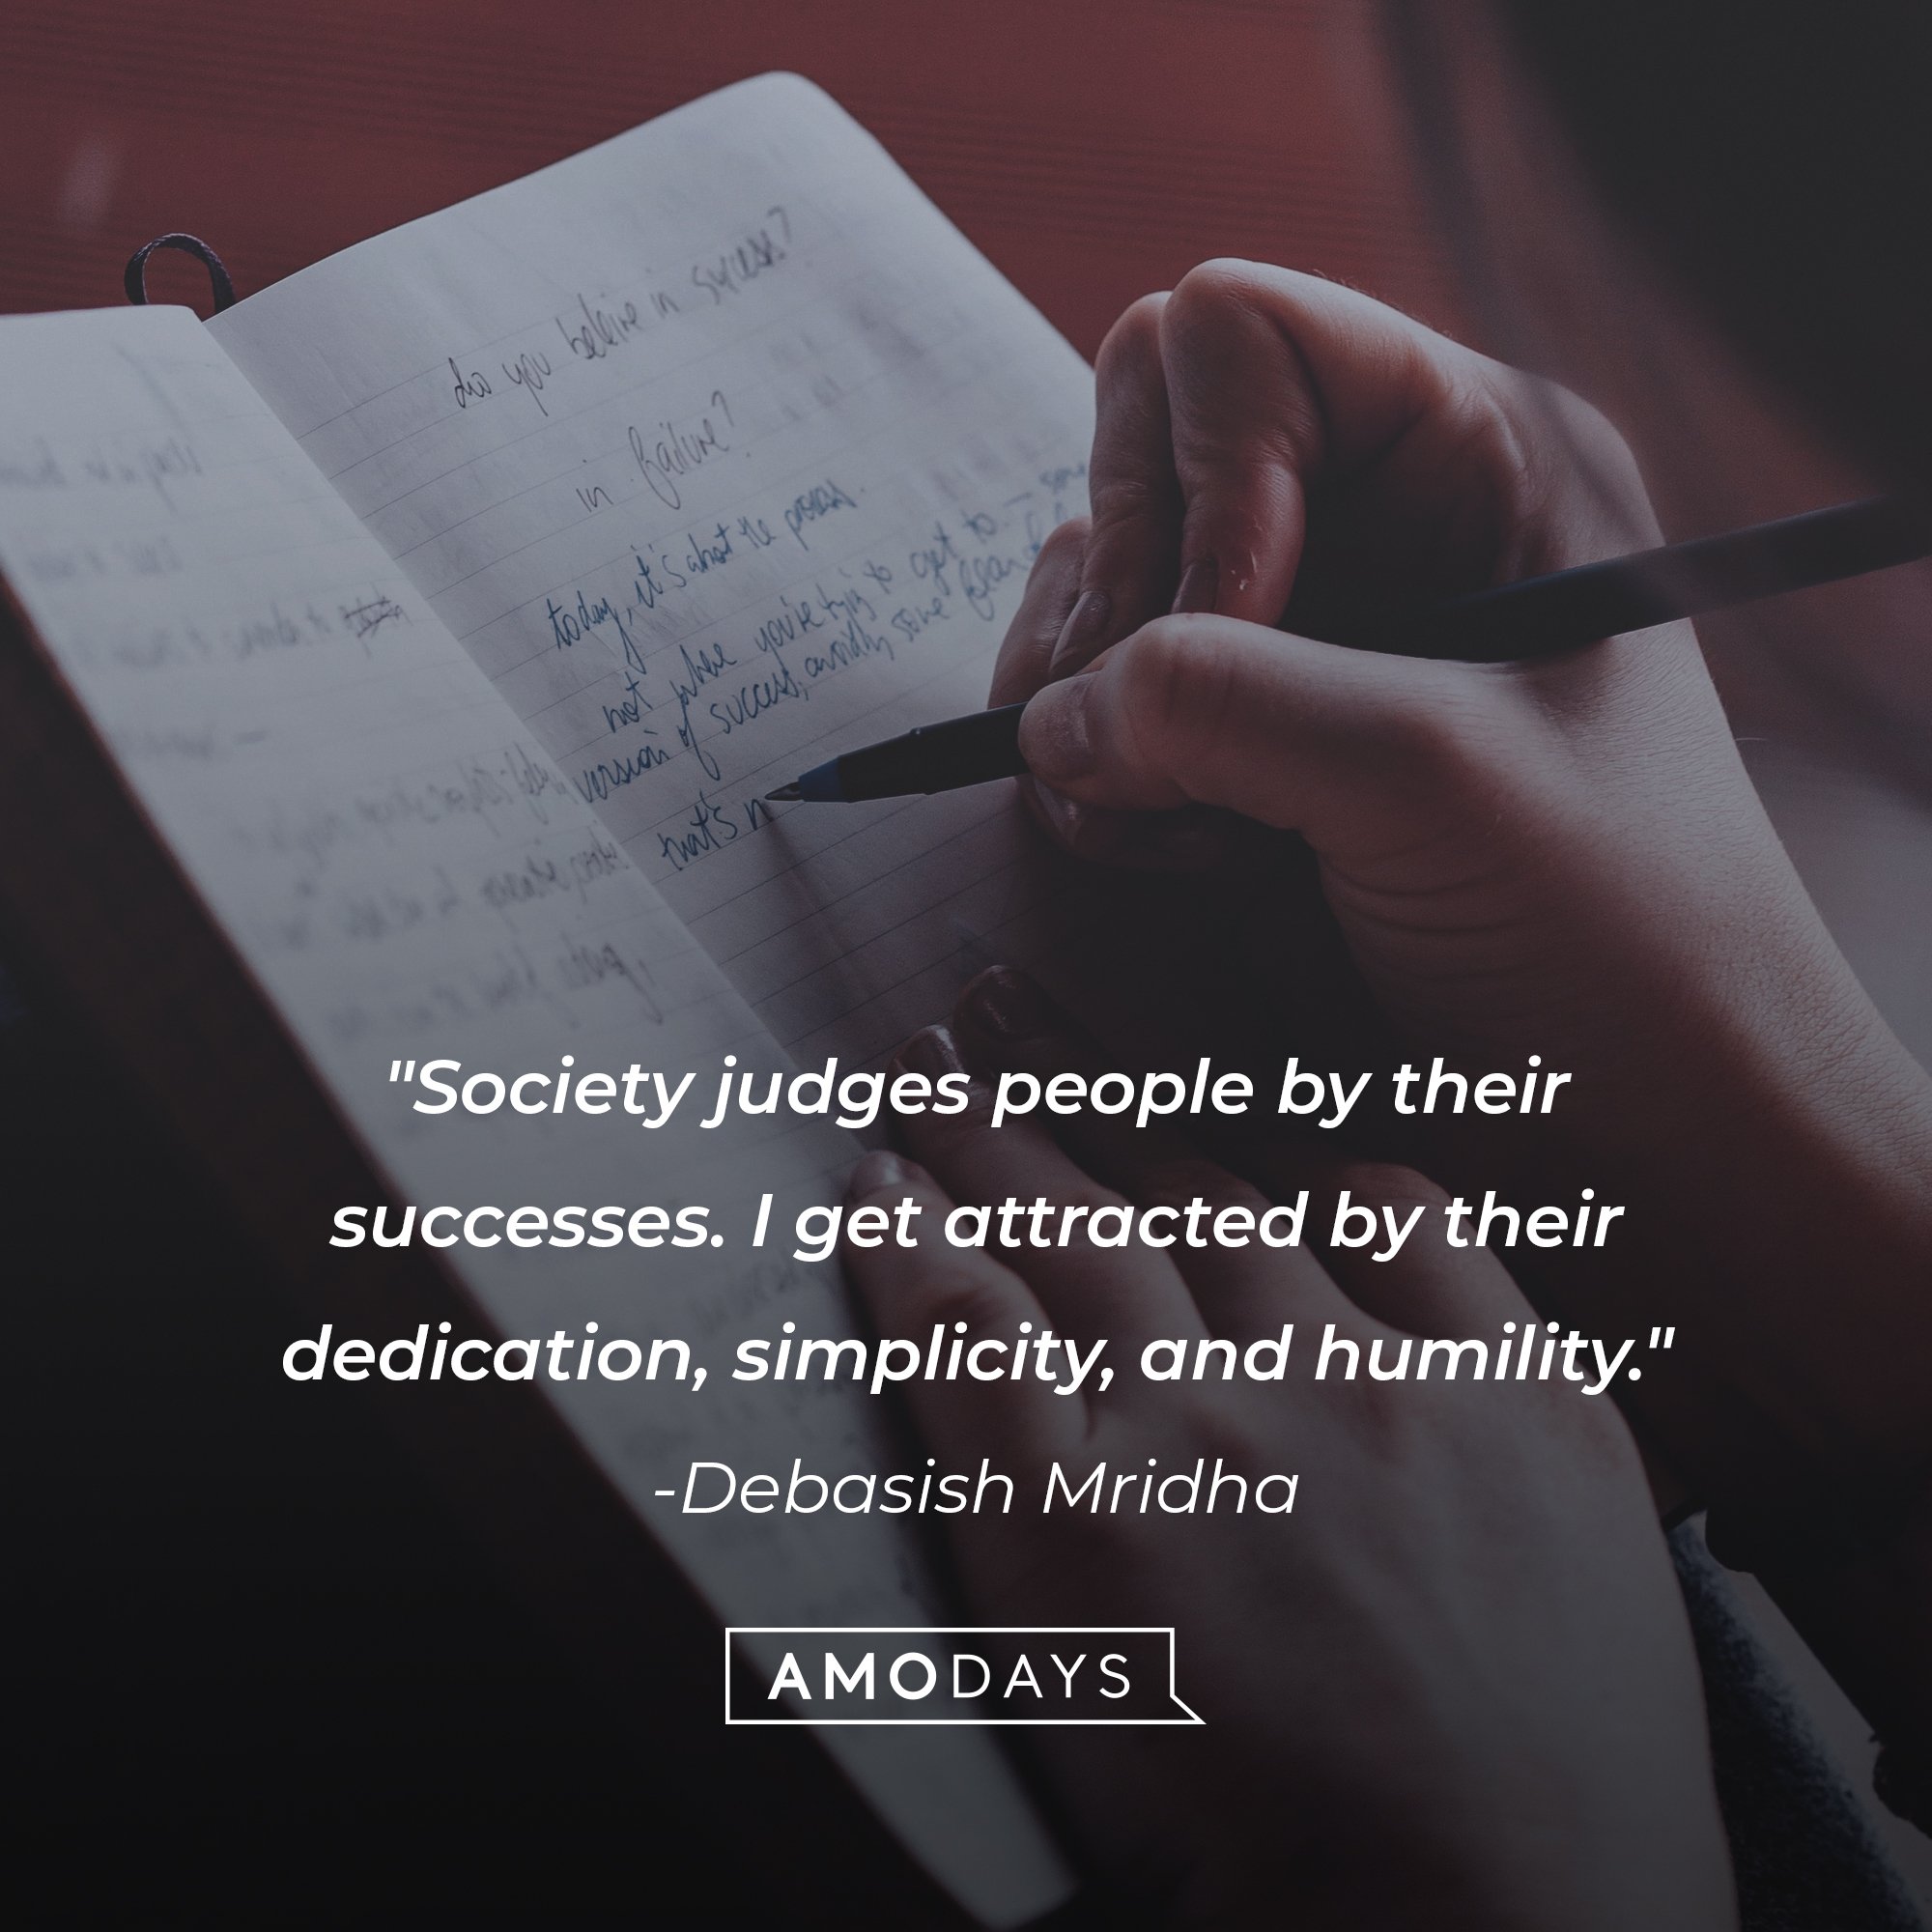 Debasish Mridha’s quote: "Society judges people by their successes. I get attracted by their dedication, simplicity, and humility."  | Image: AmoDays